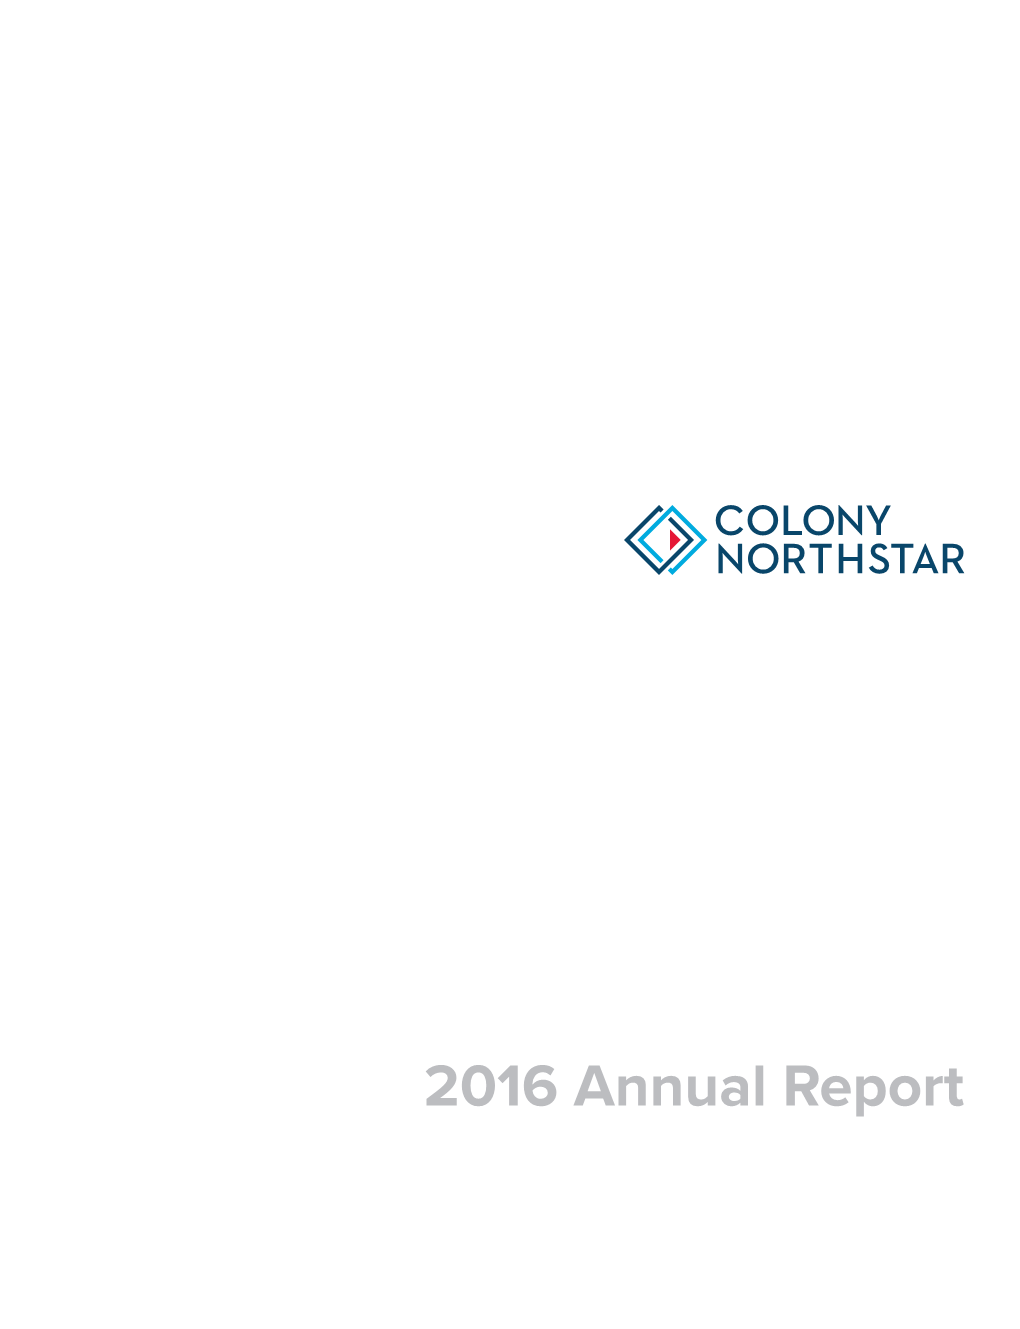 Colony Northstar 2016 Annual Report